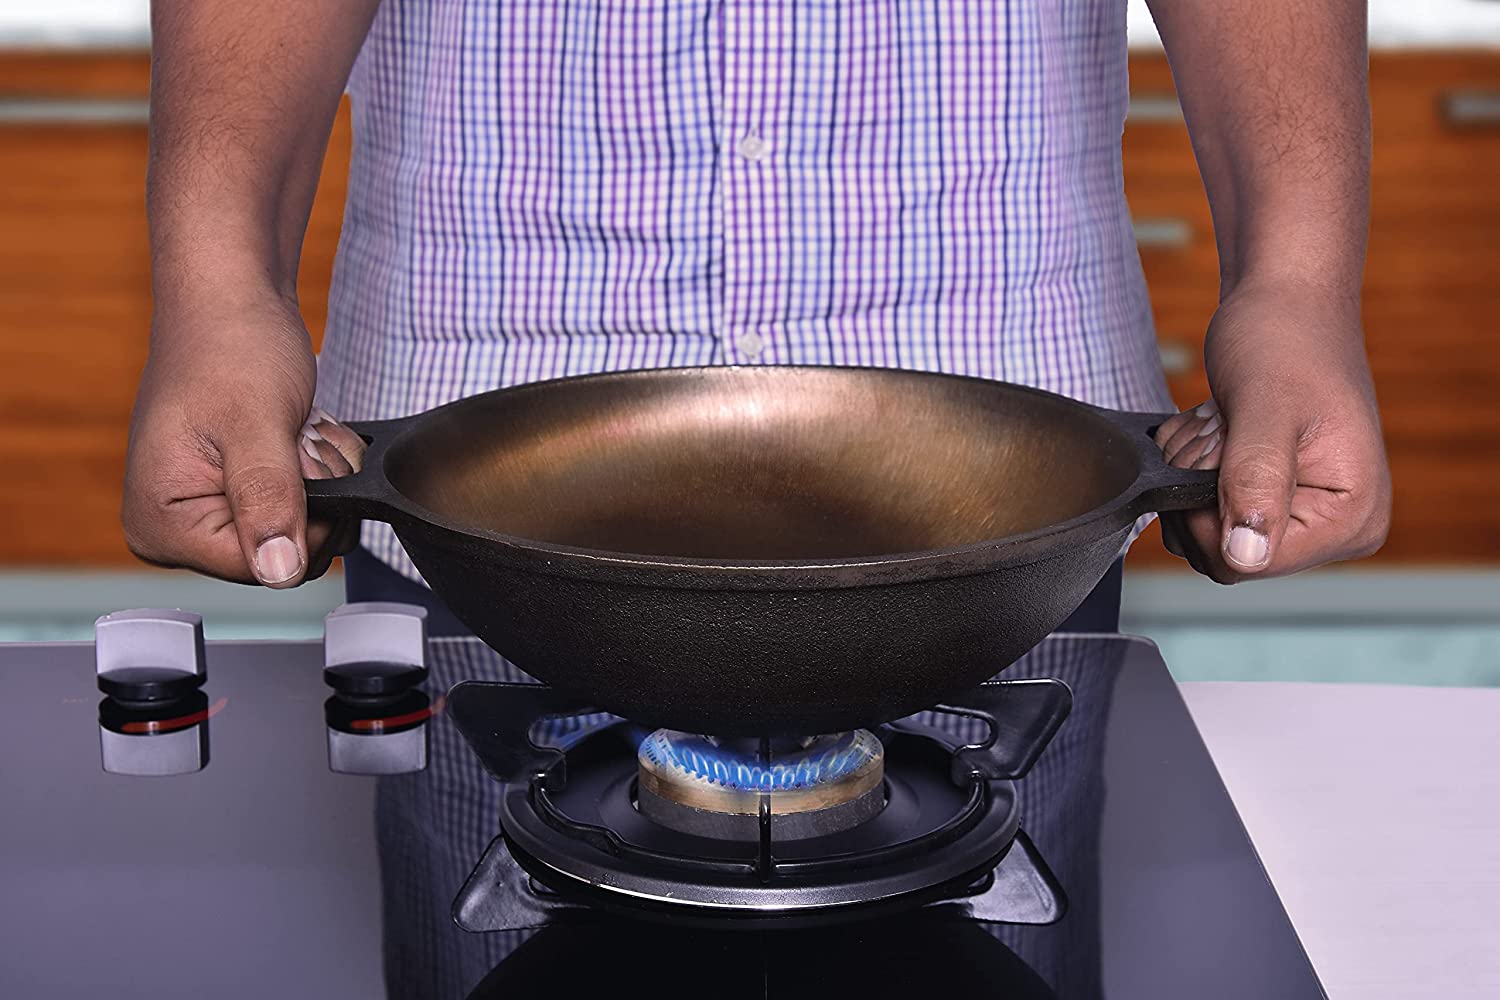 https://store.wholesometales.com/wp-content/uploads/2021/08/Cast-Iron-Kadhai-Wok-for-Cooking-by-Indus-Valley-side.jpg